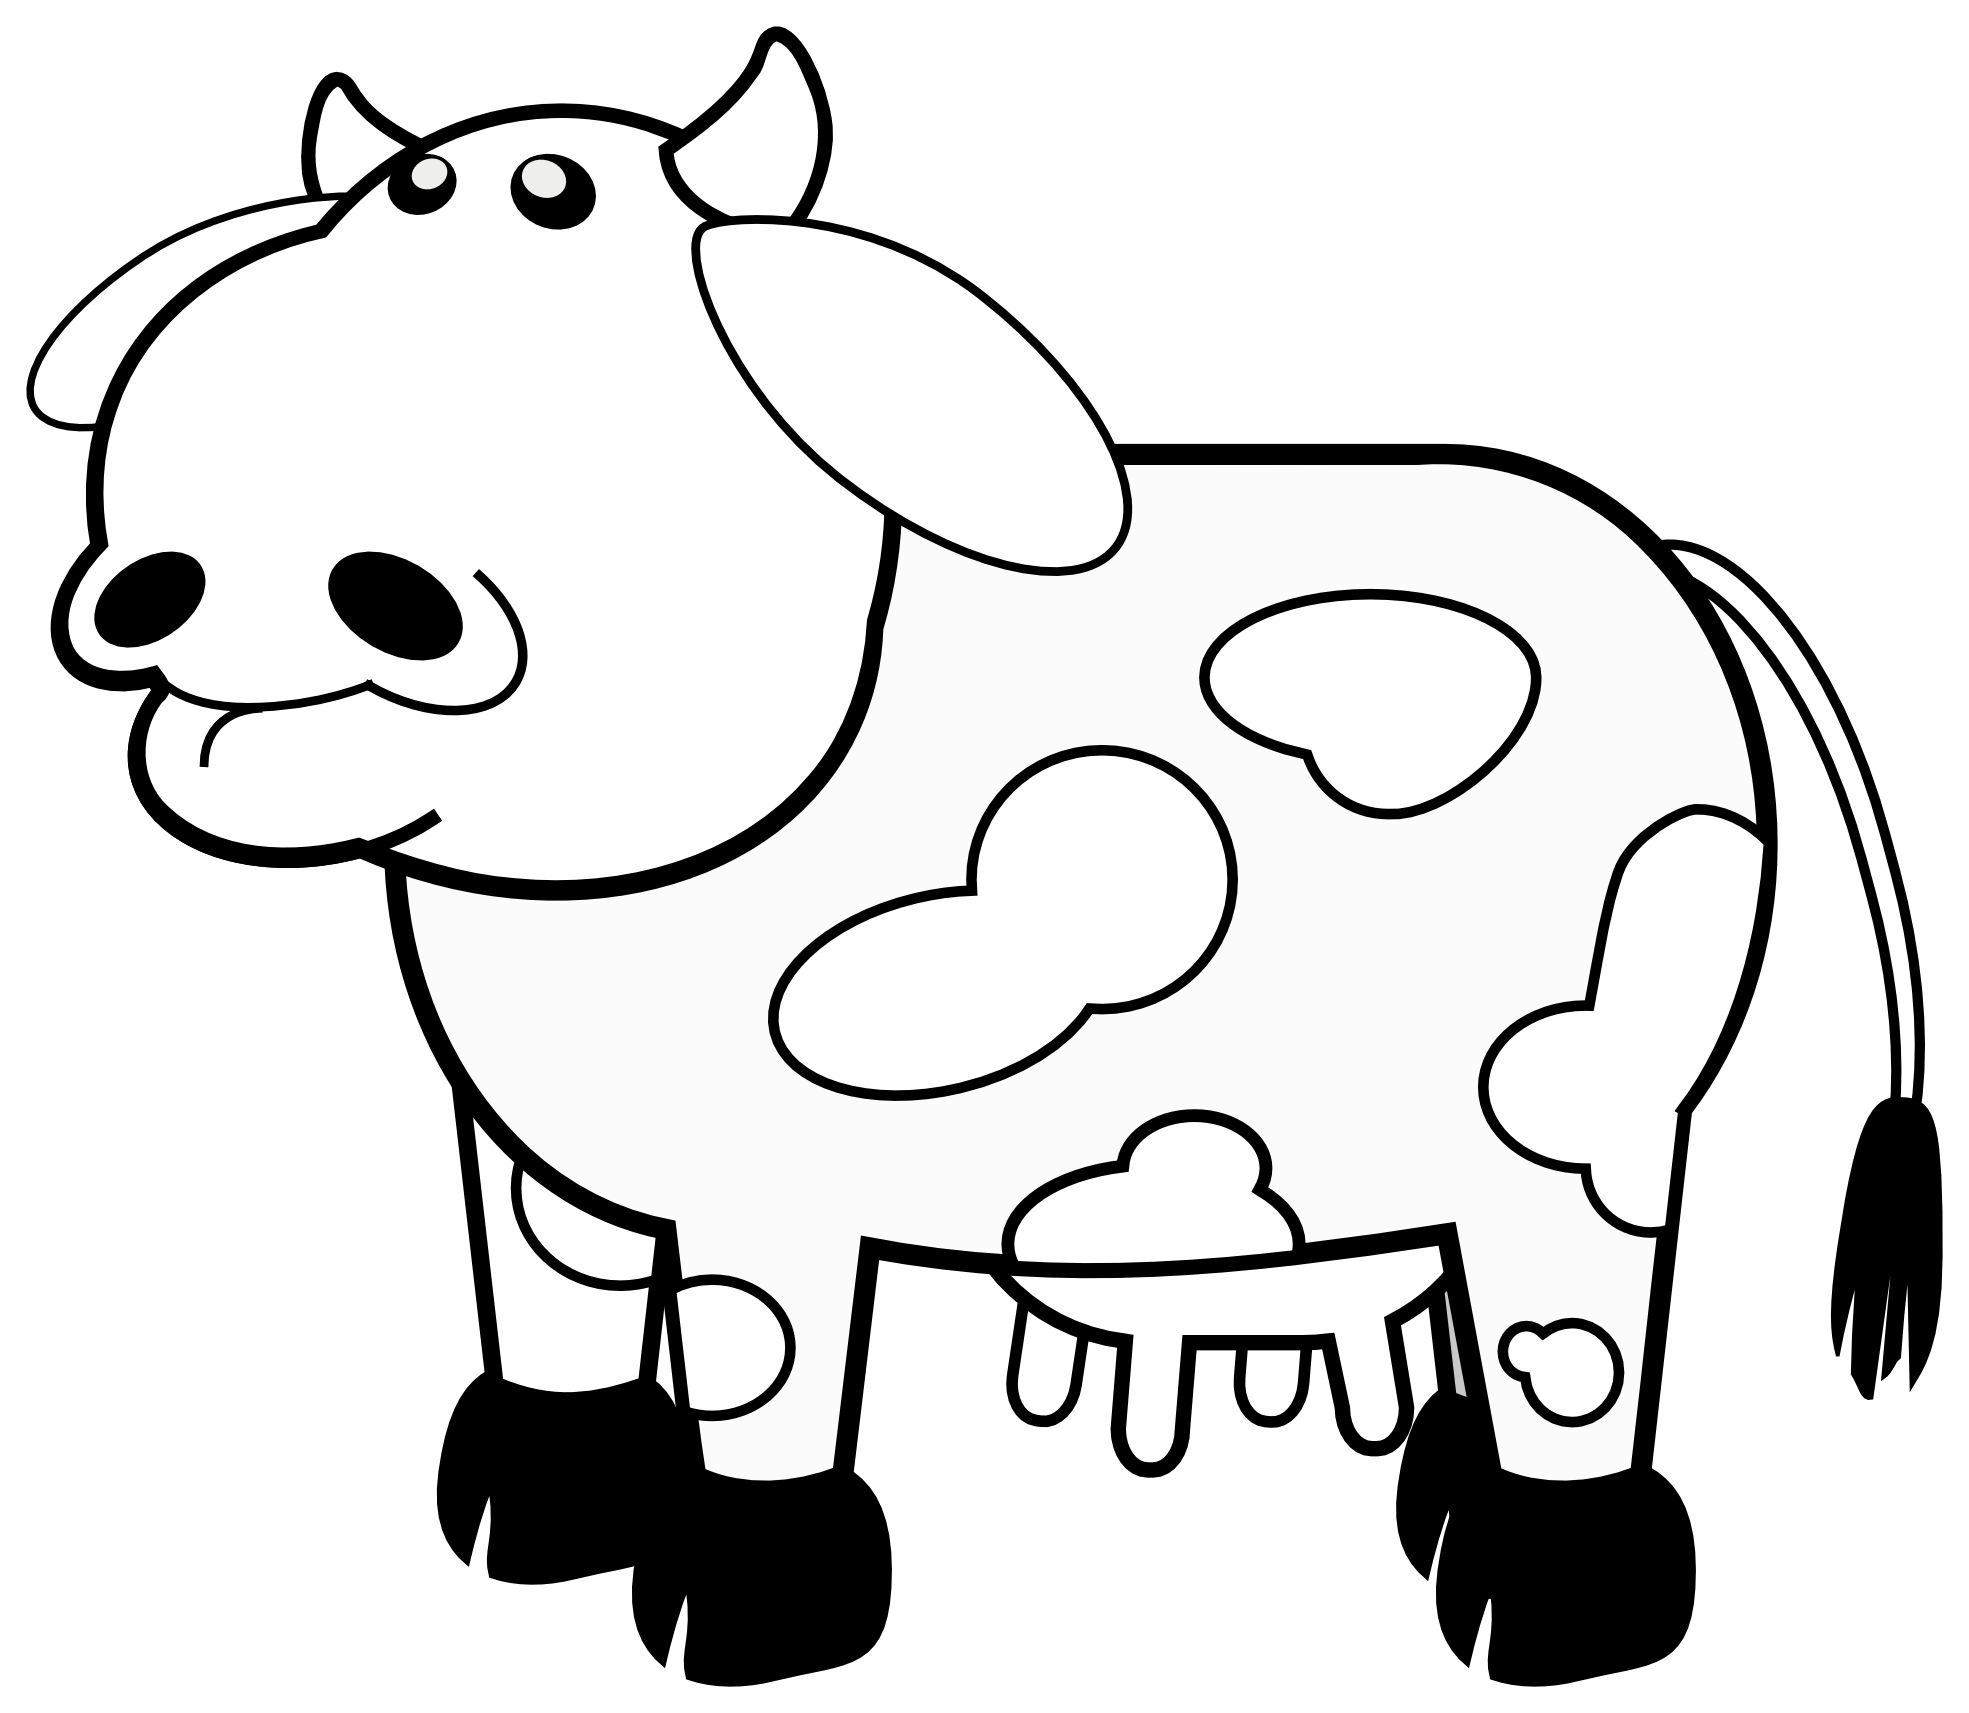 Cow Clip Art Black And White - Gallery